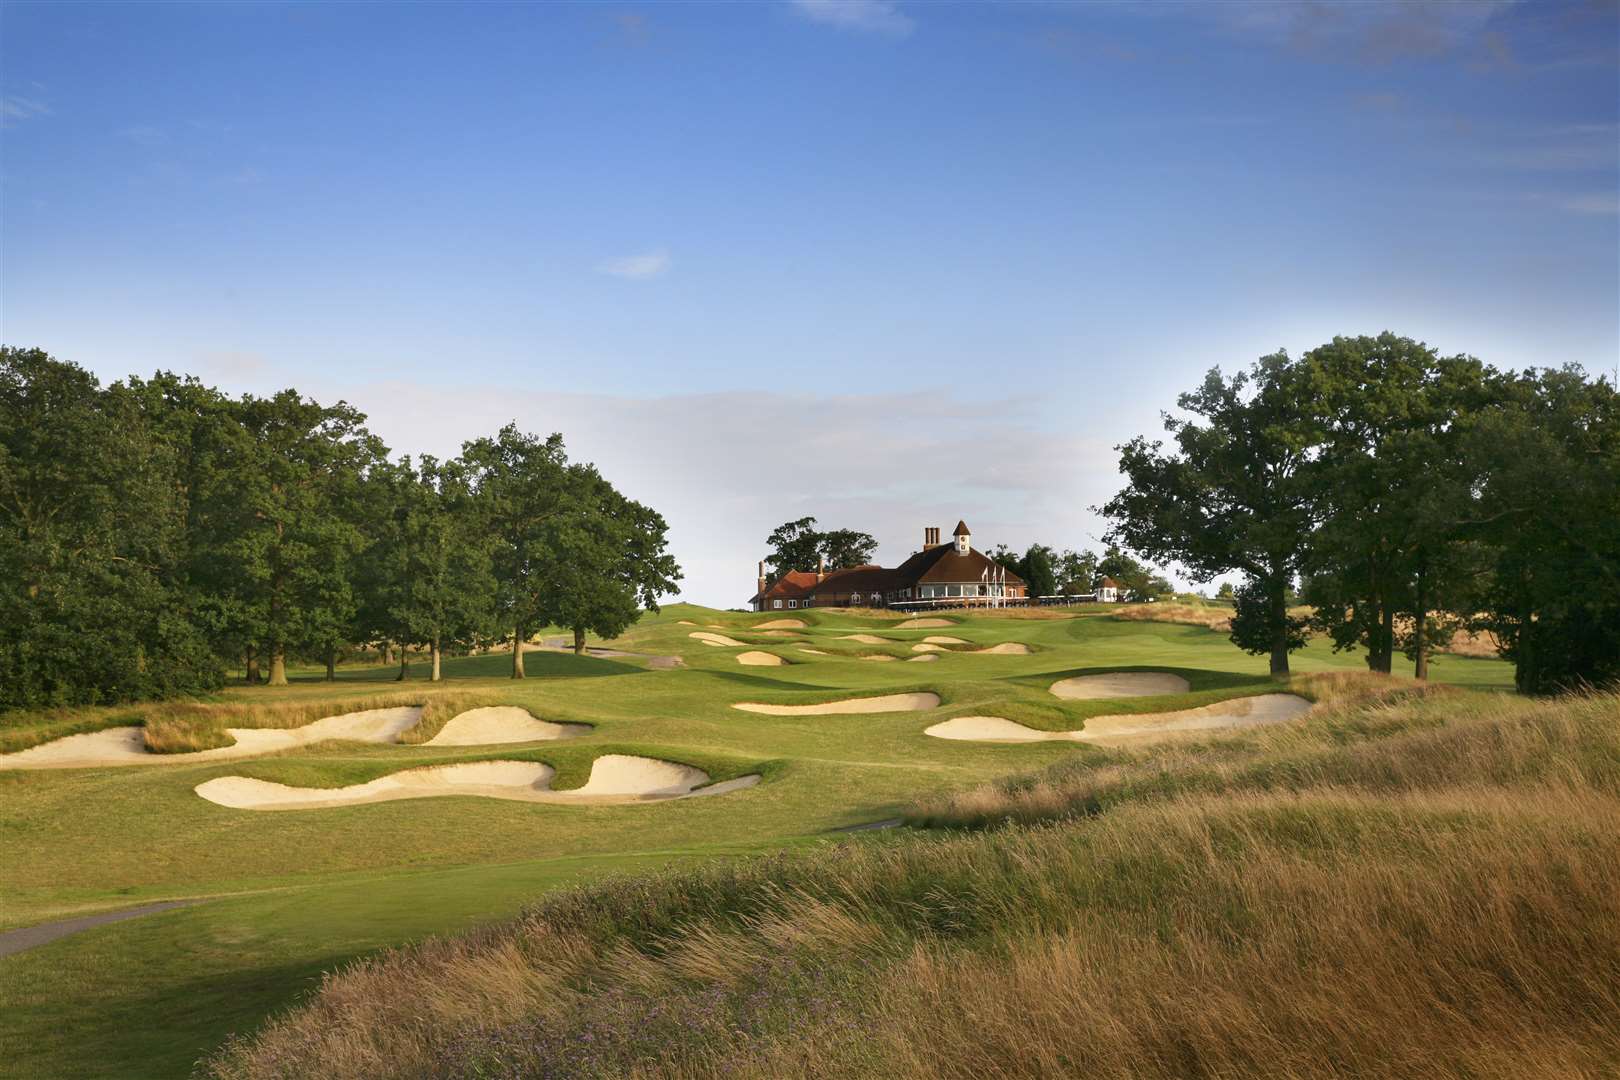 Chart Hills Golf Club is in on the market for £2.75 million